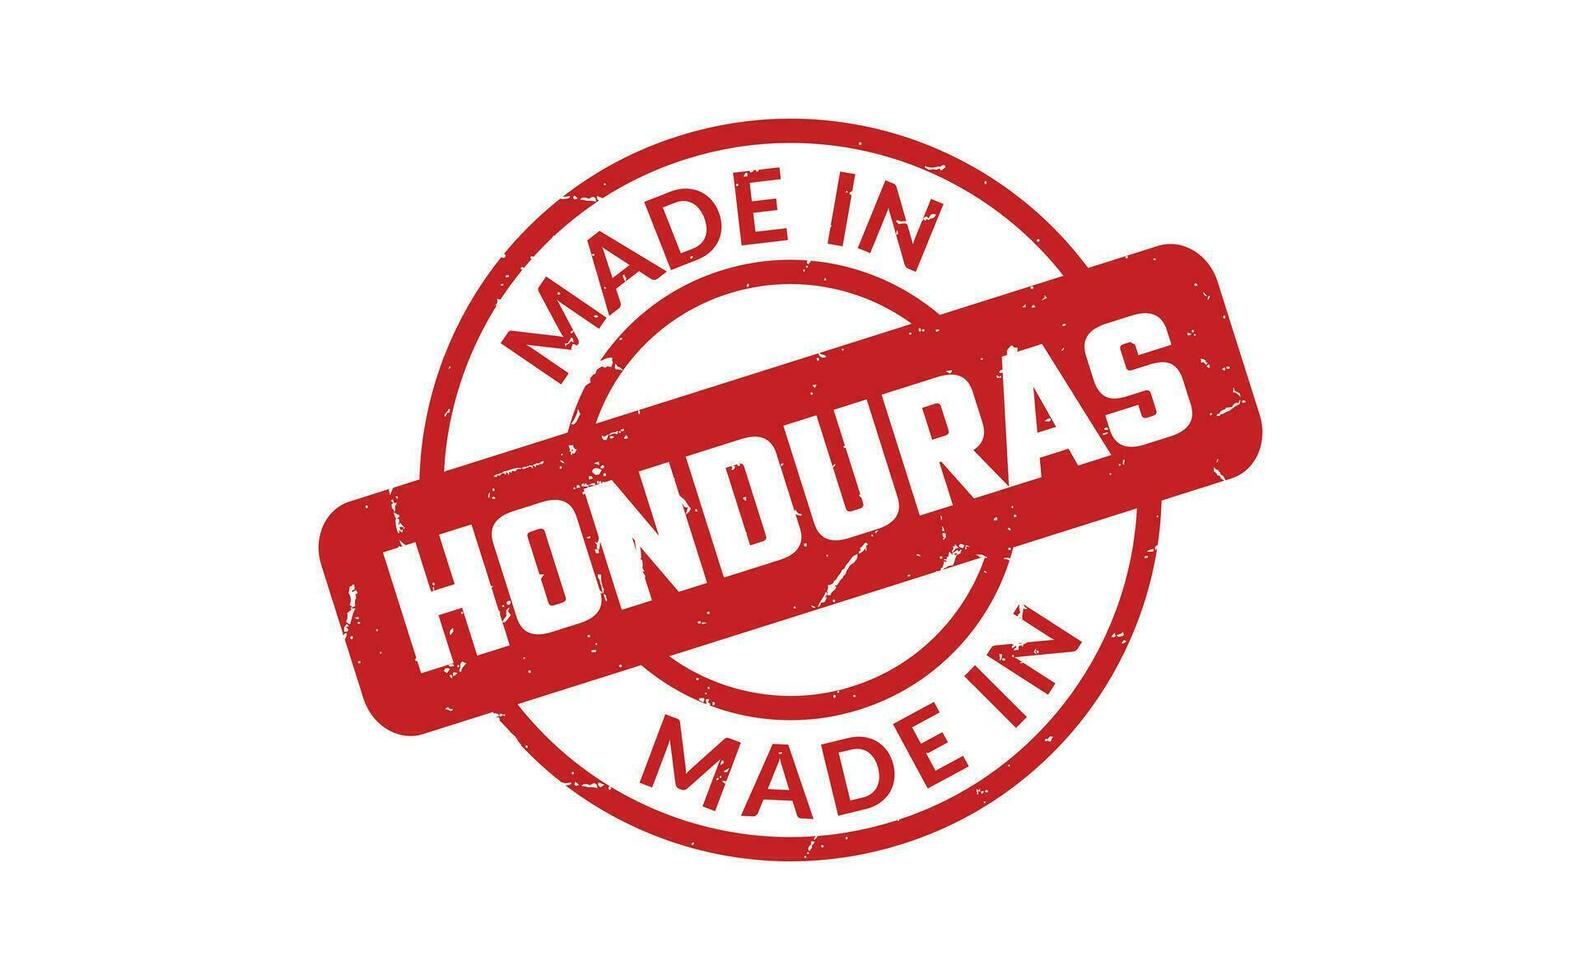 Made In Honduras Rubber Stamp vector